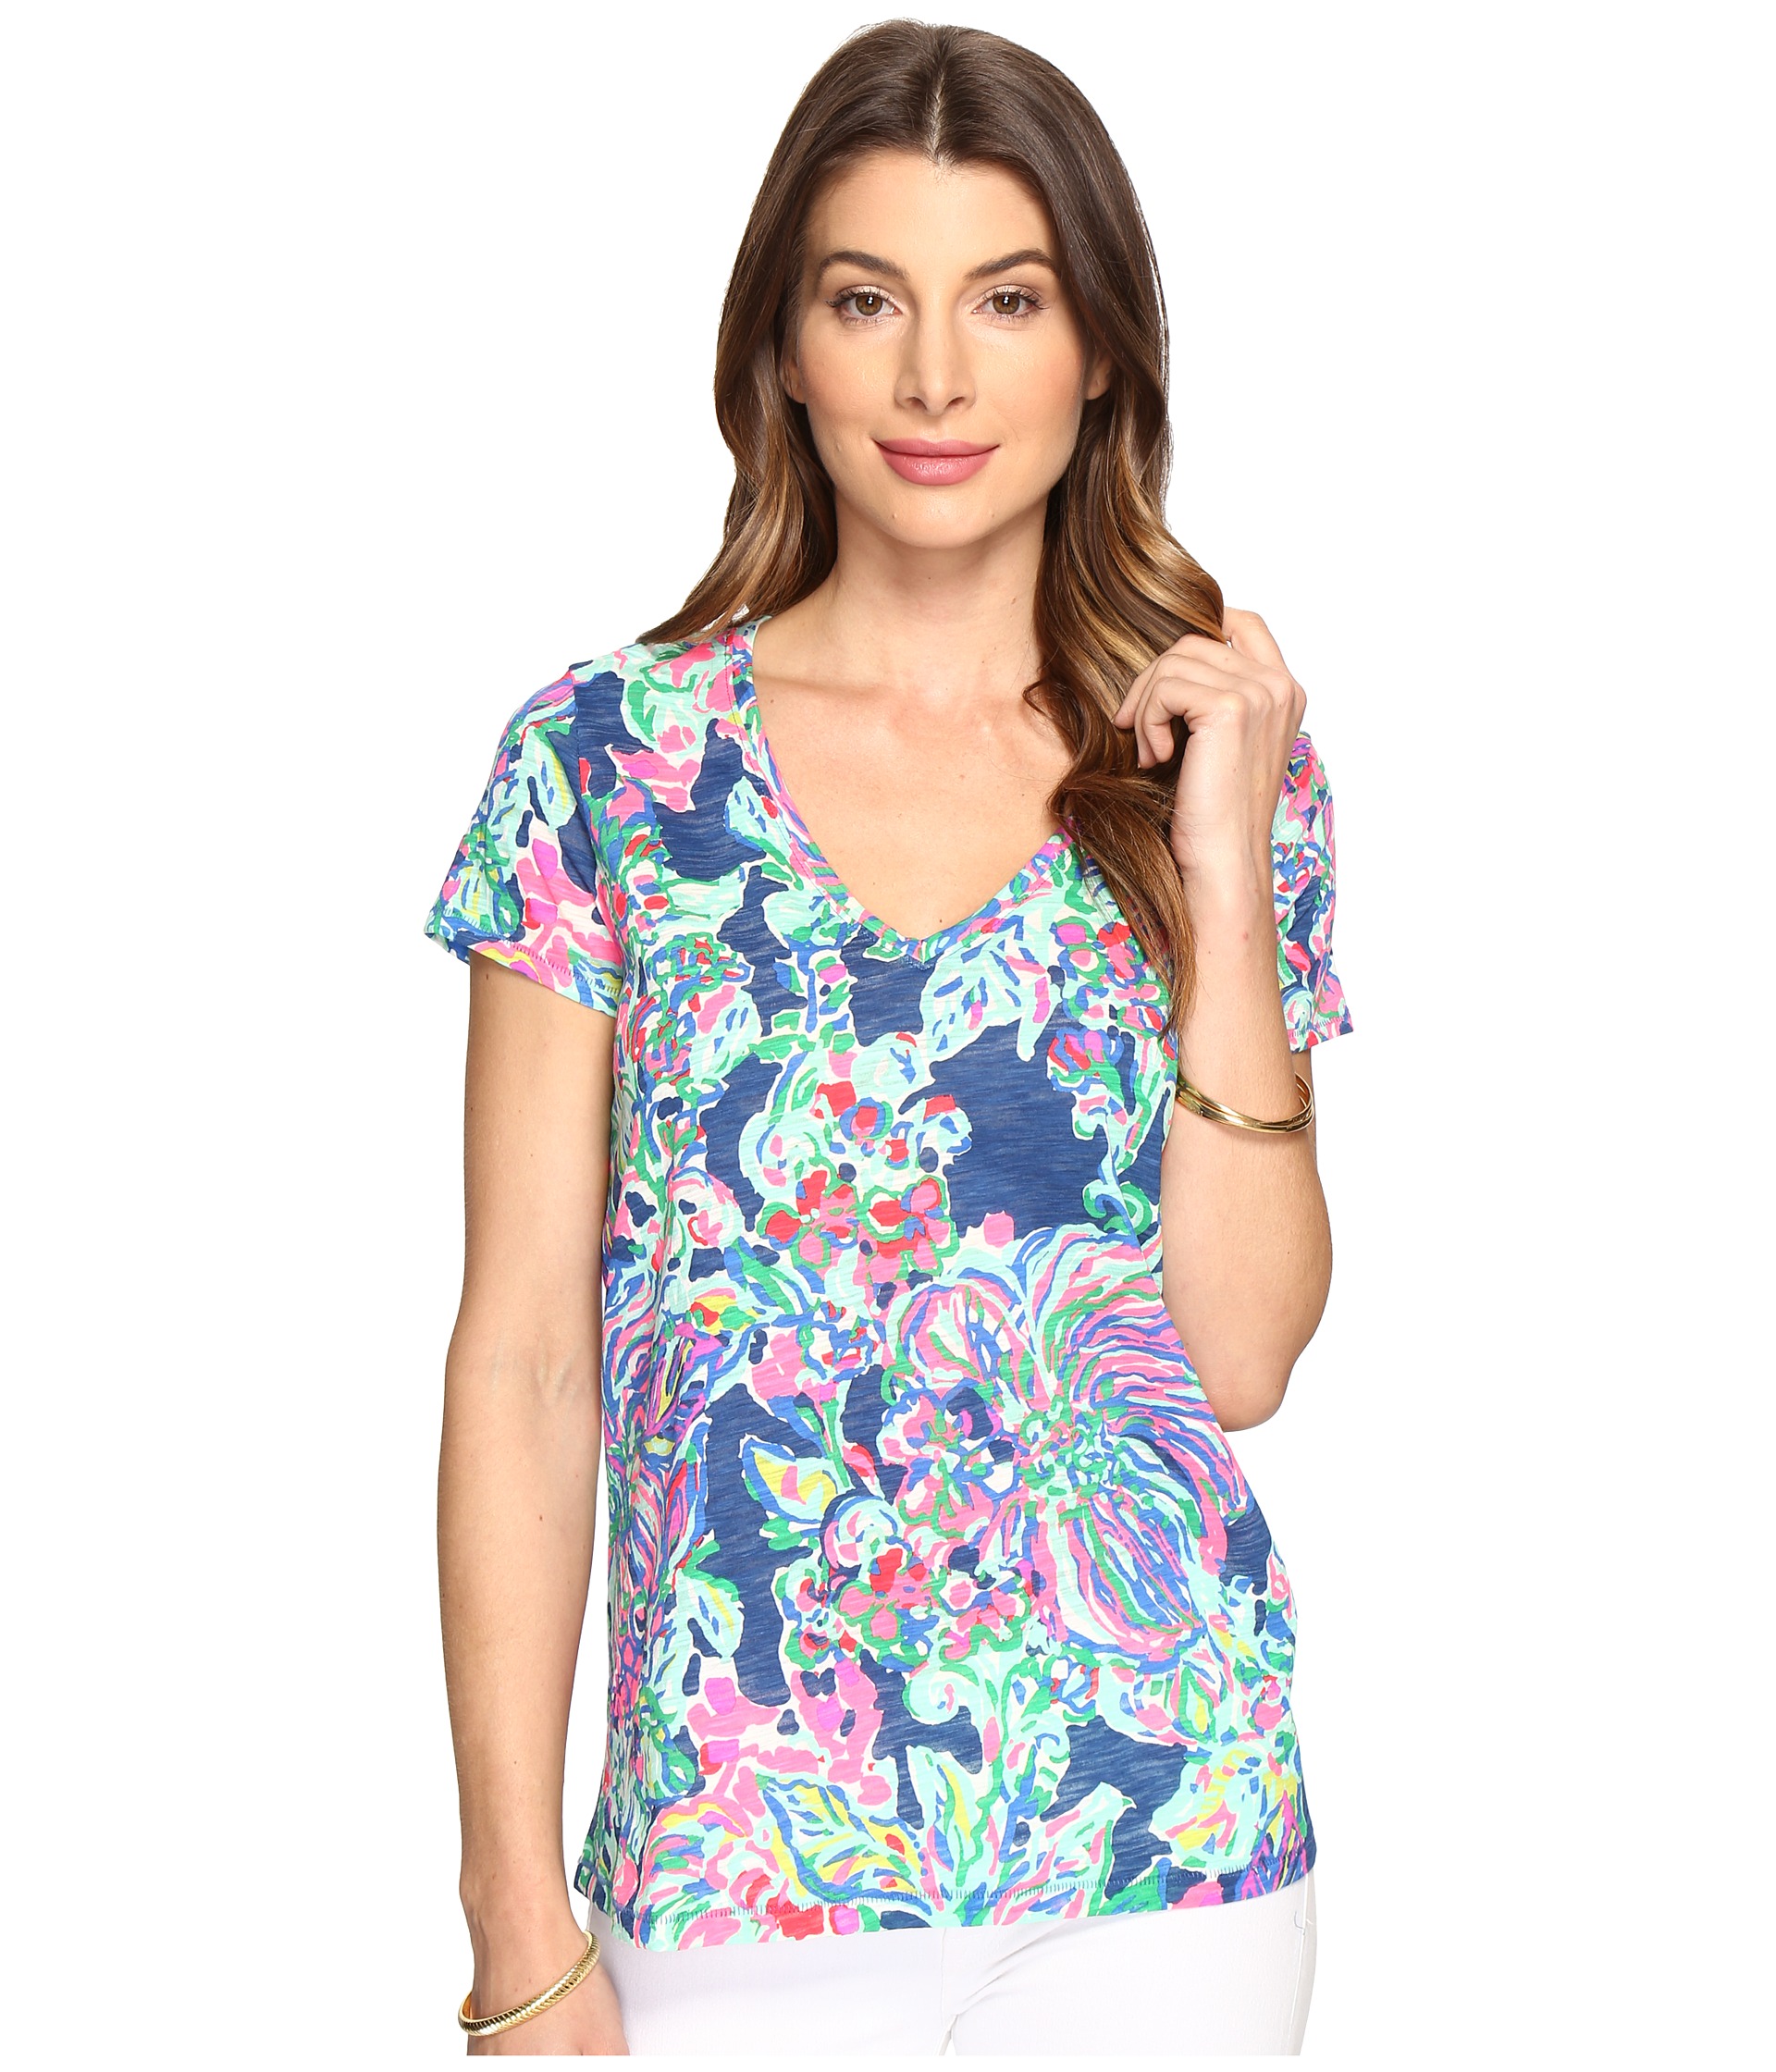 Lilly Pulitzer Etta Top at Zappos.com